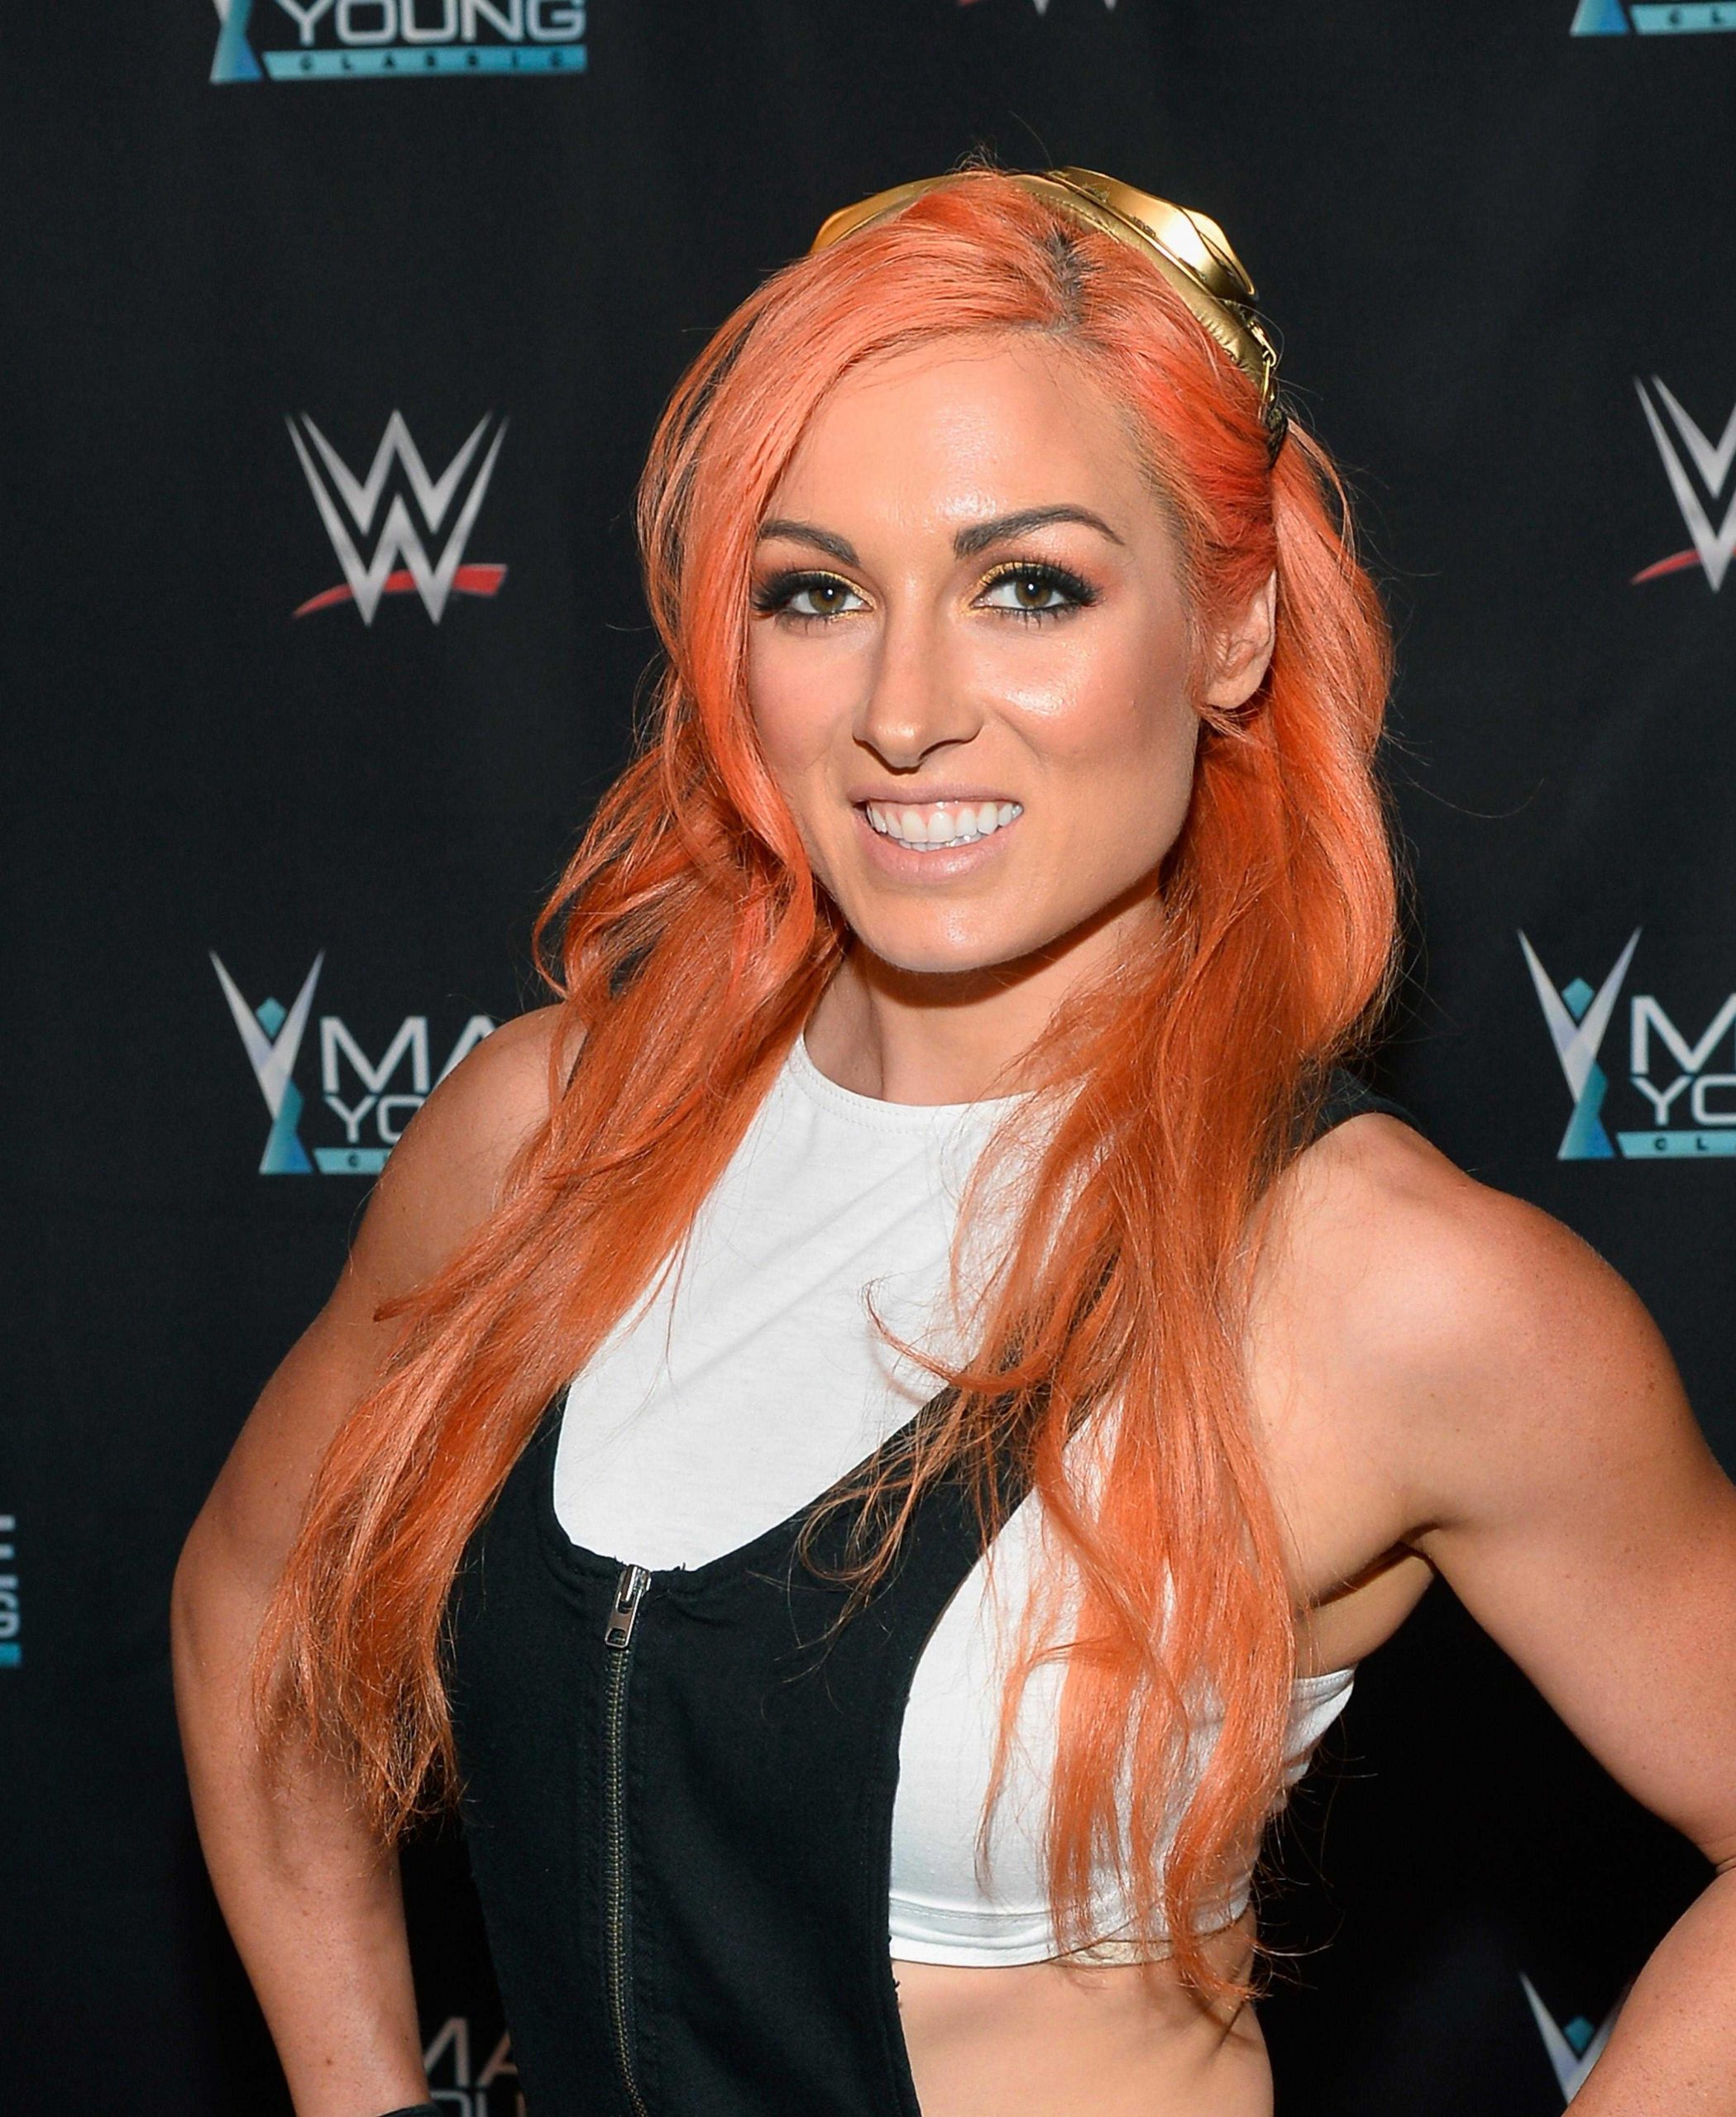 70+ Hot And Sexy Pictures of Becky Lynch – WWE Diva Will Sizzle You Up 23